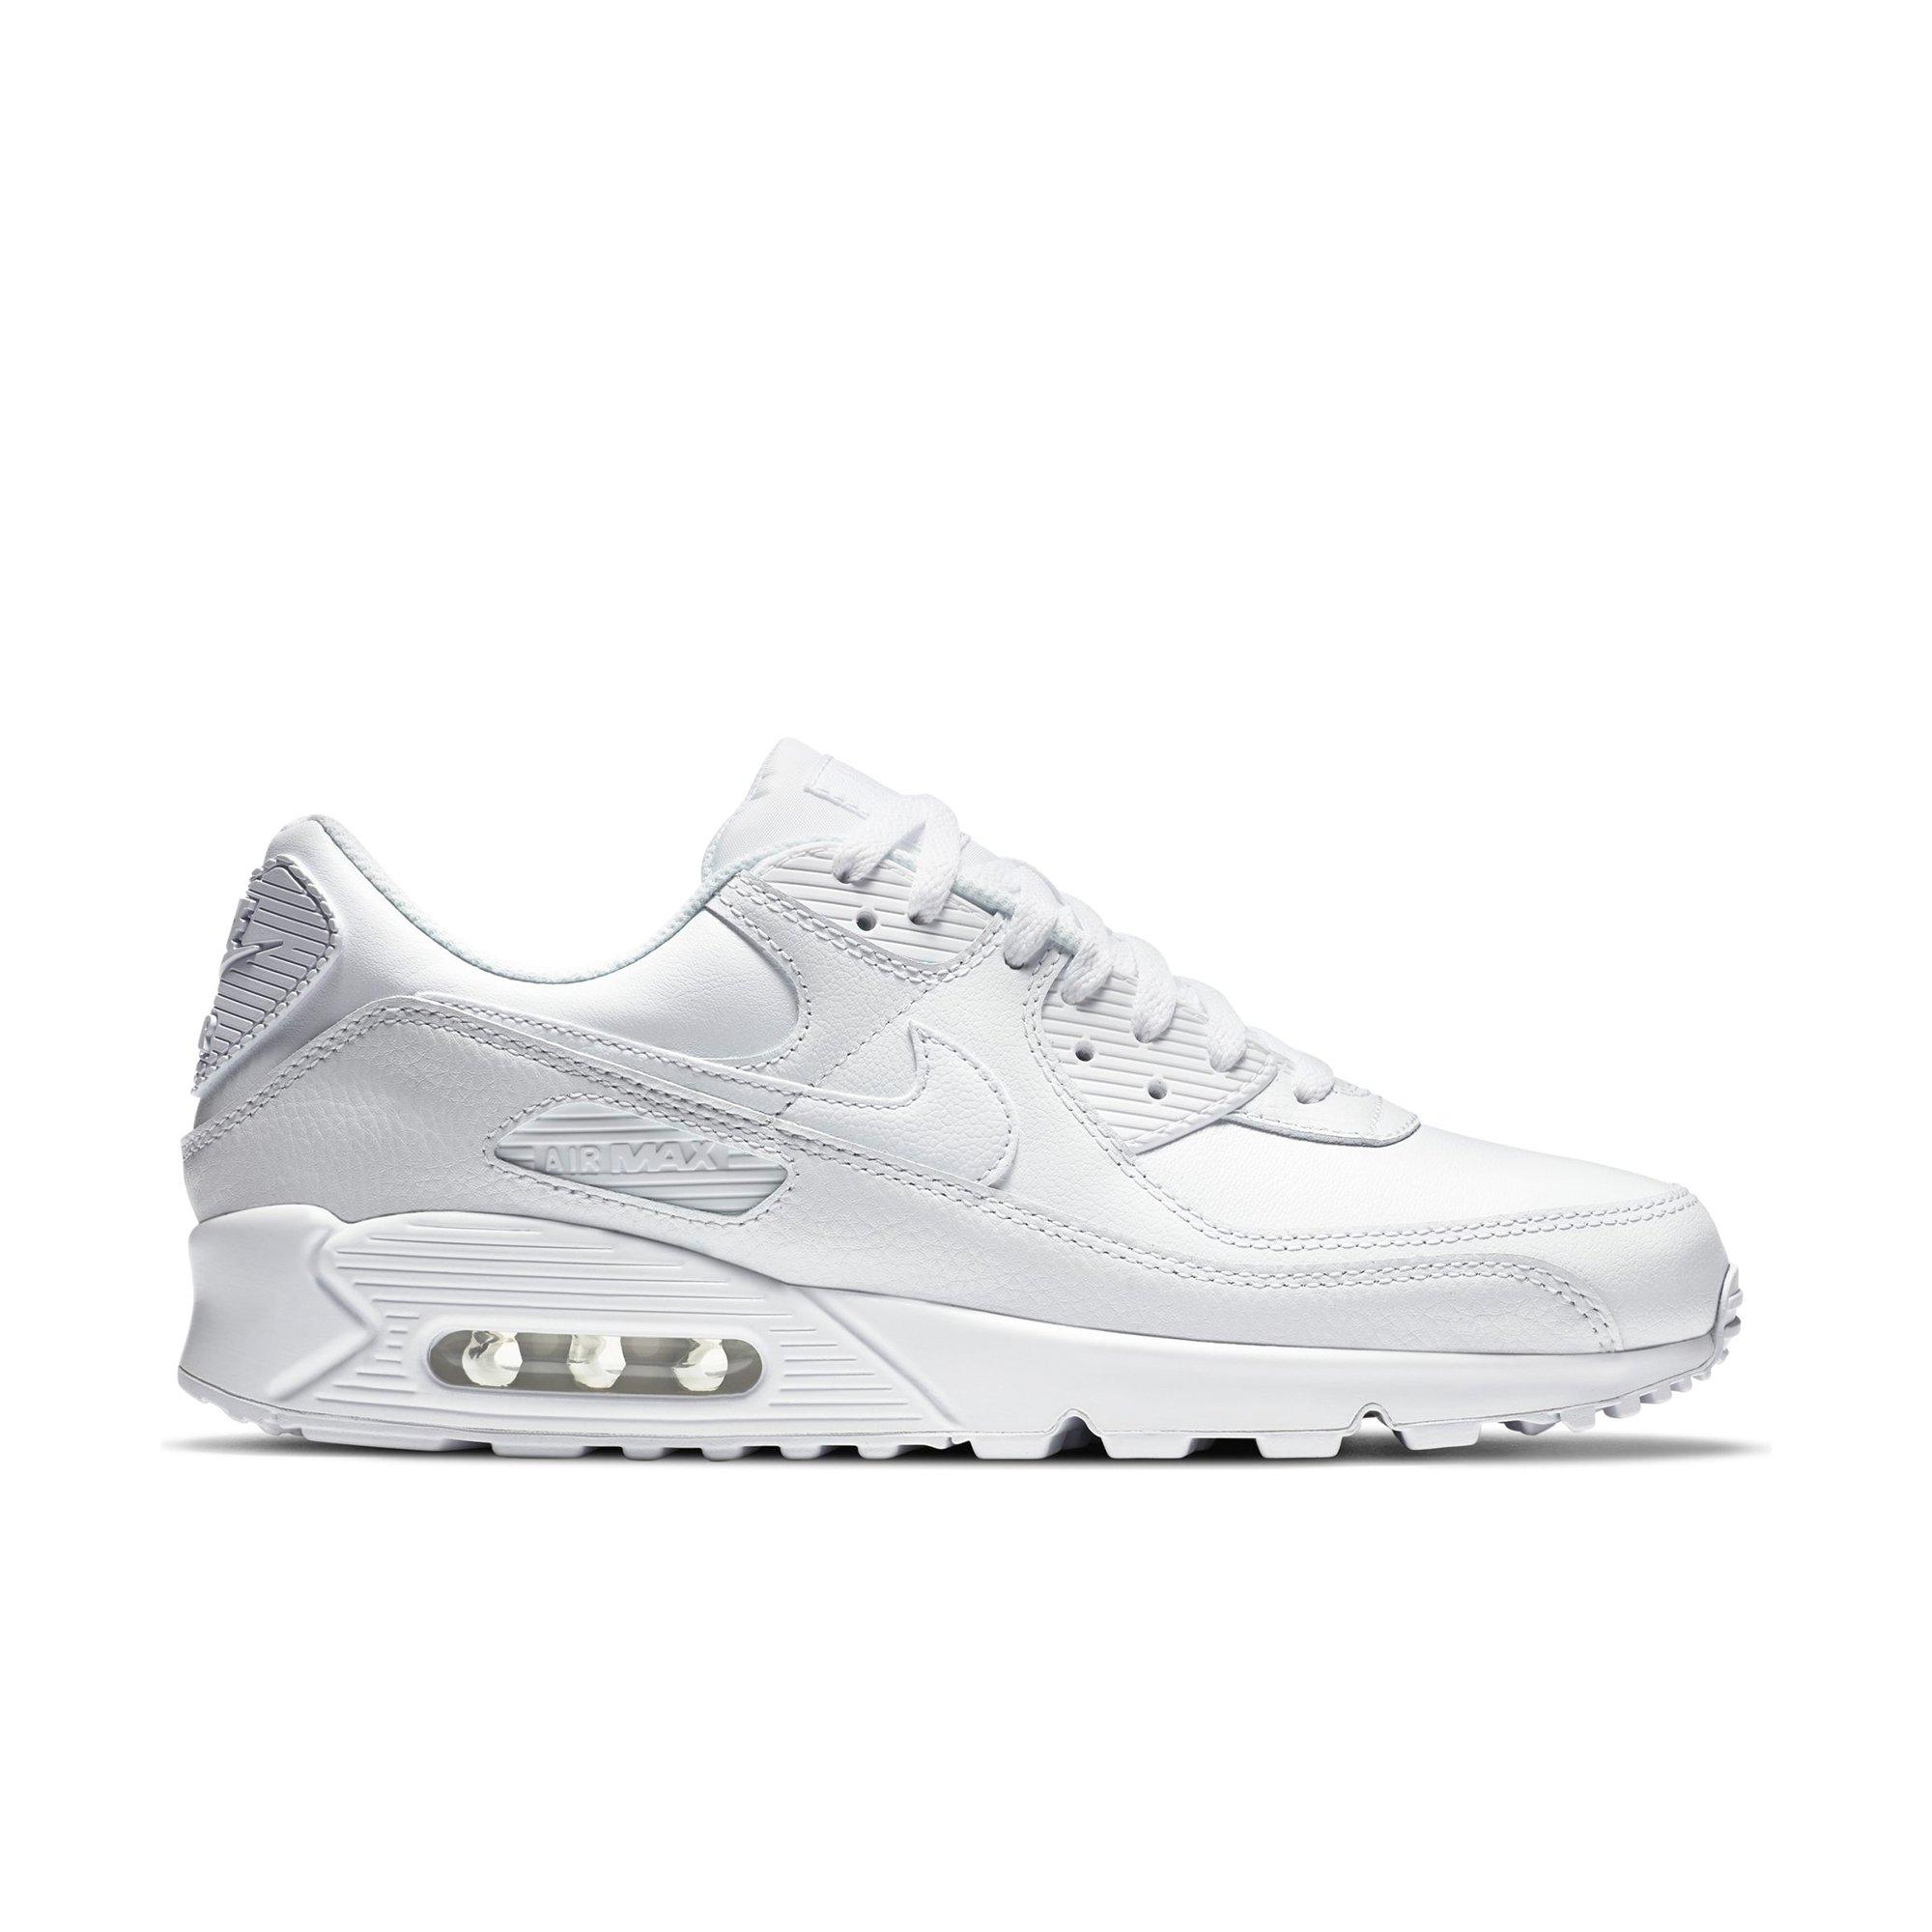 air max 90 white leather men's